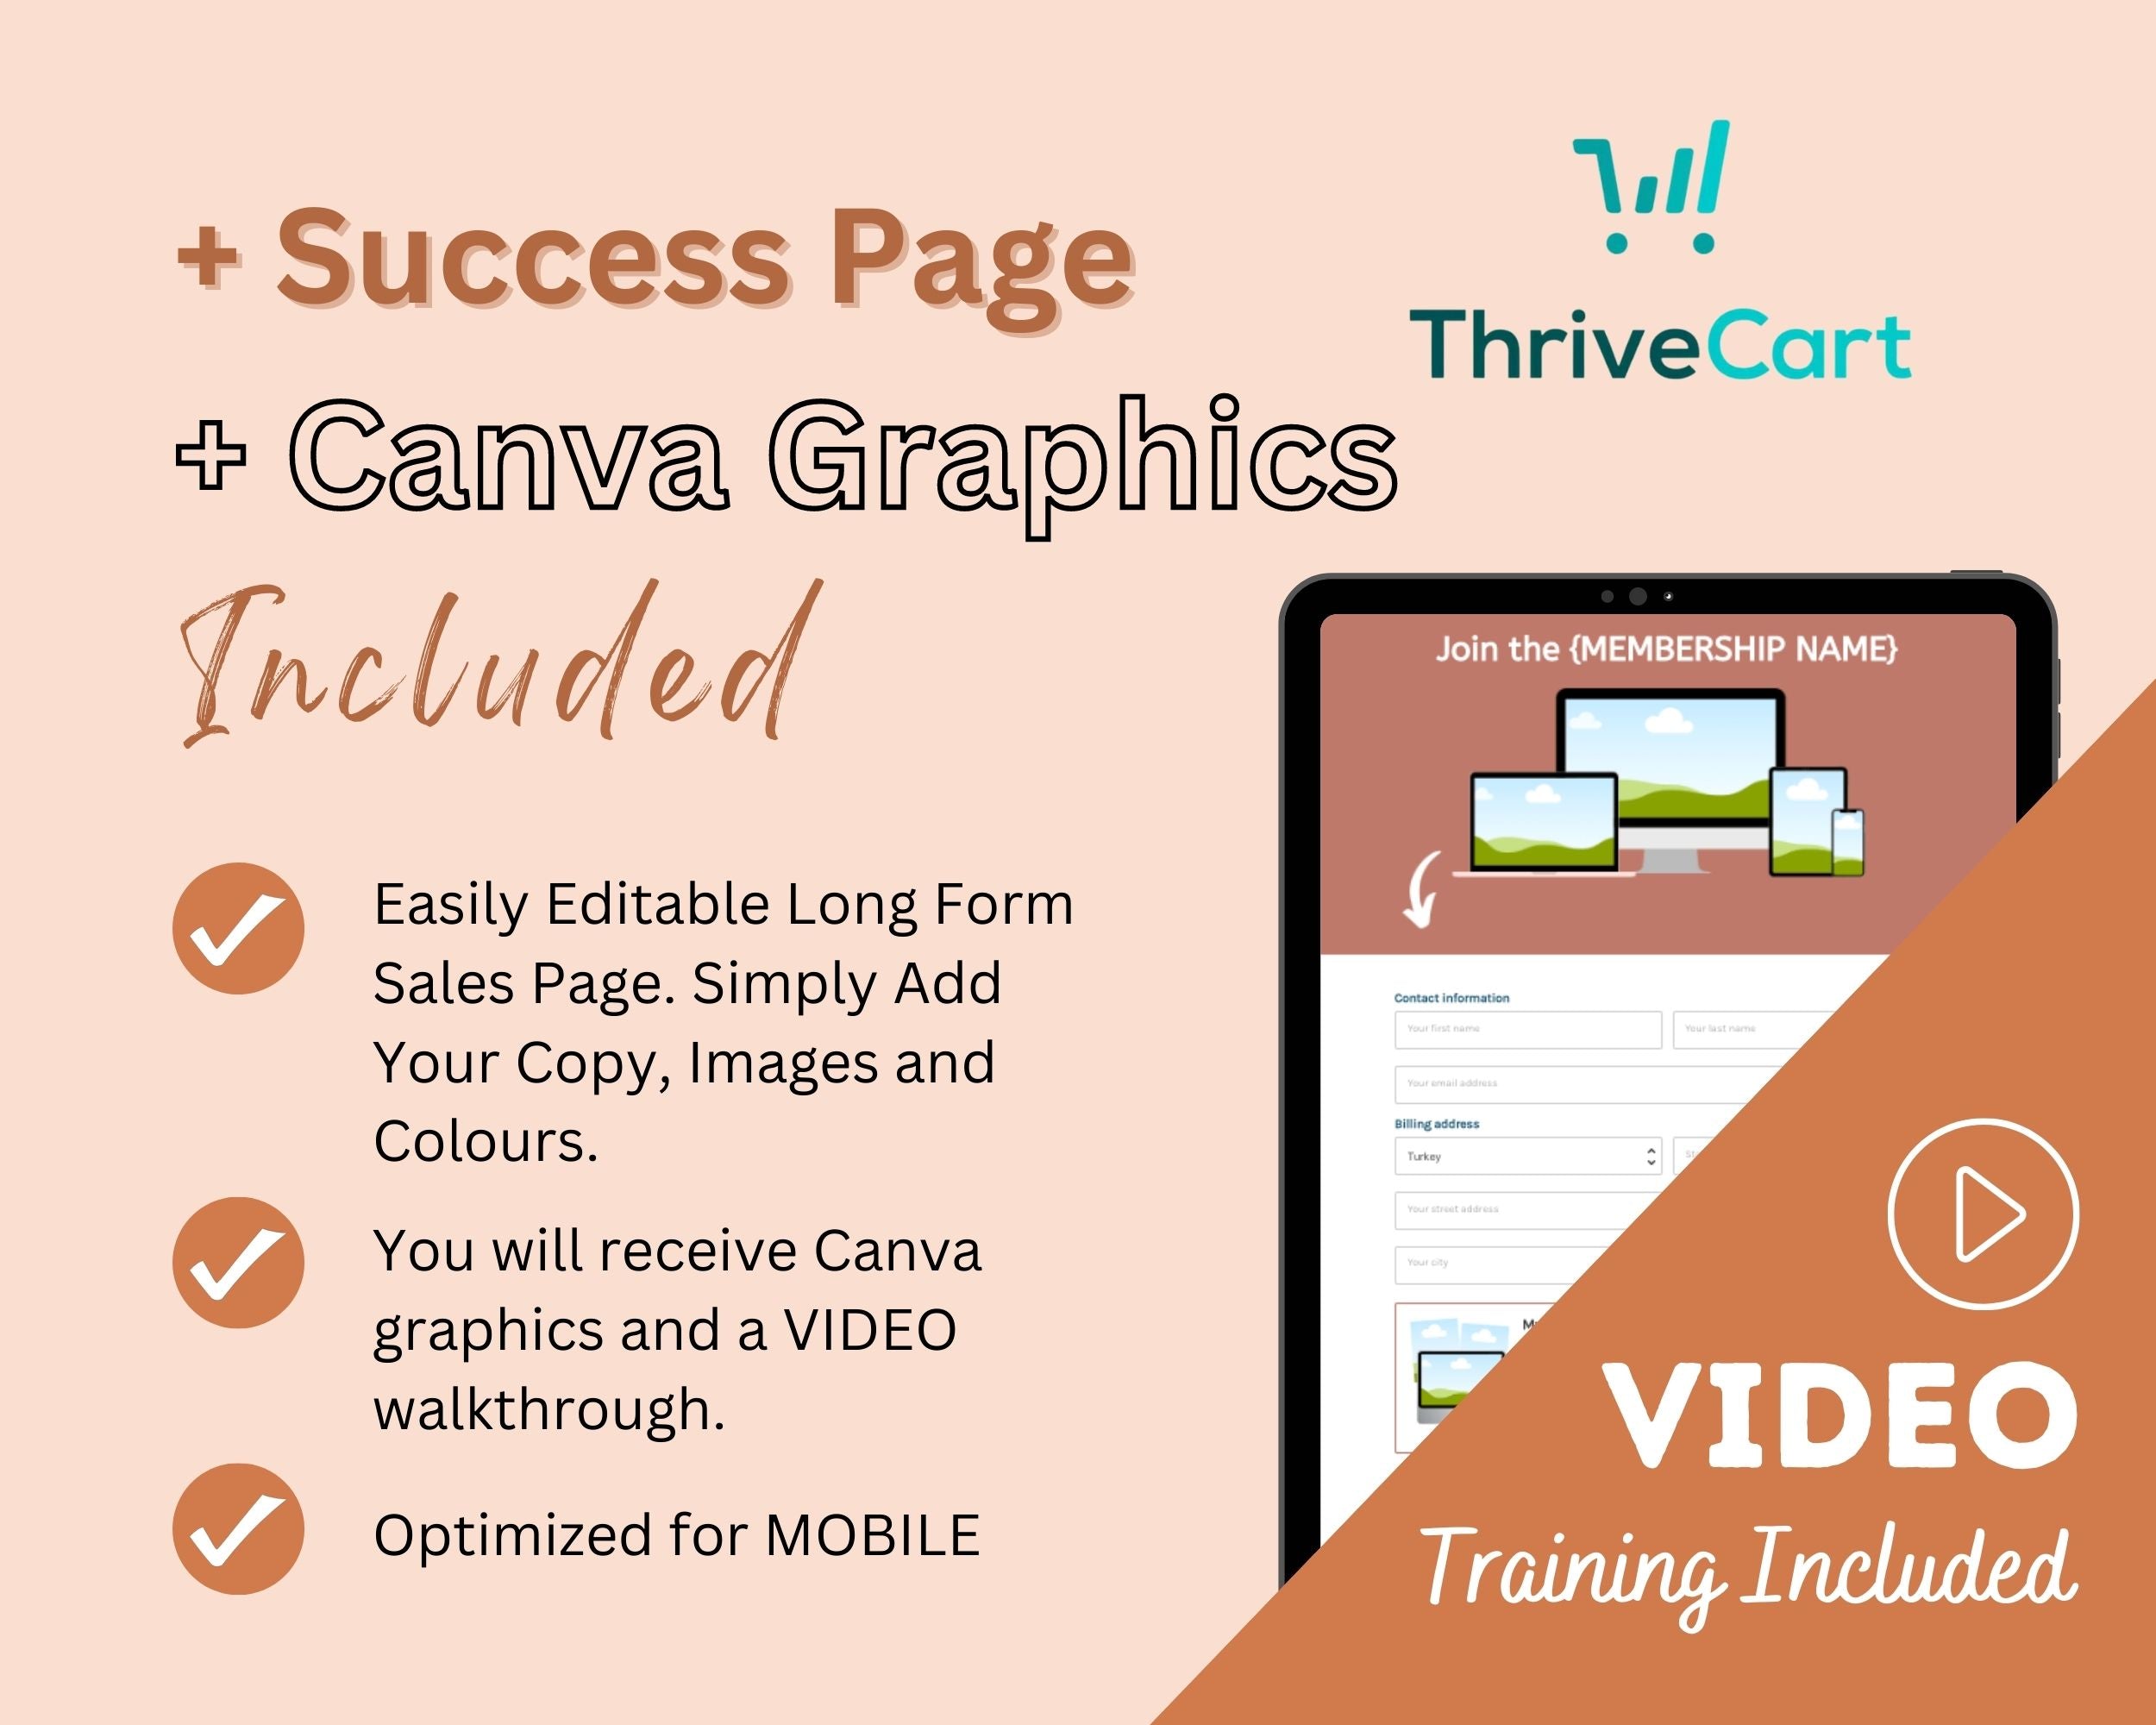 Membership Sales Page Template in ThriveCart